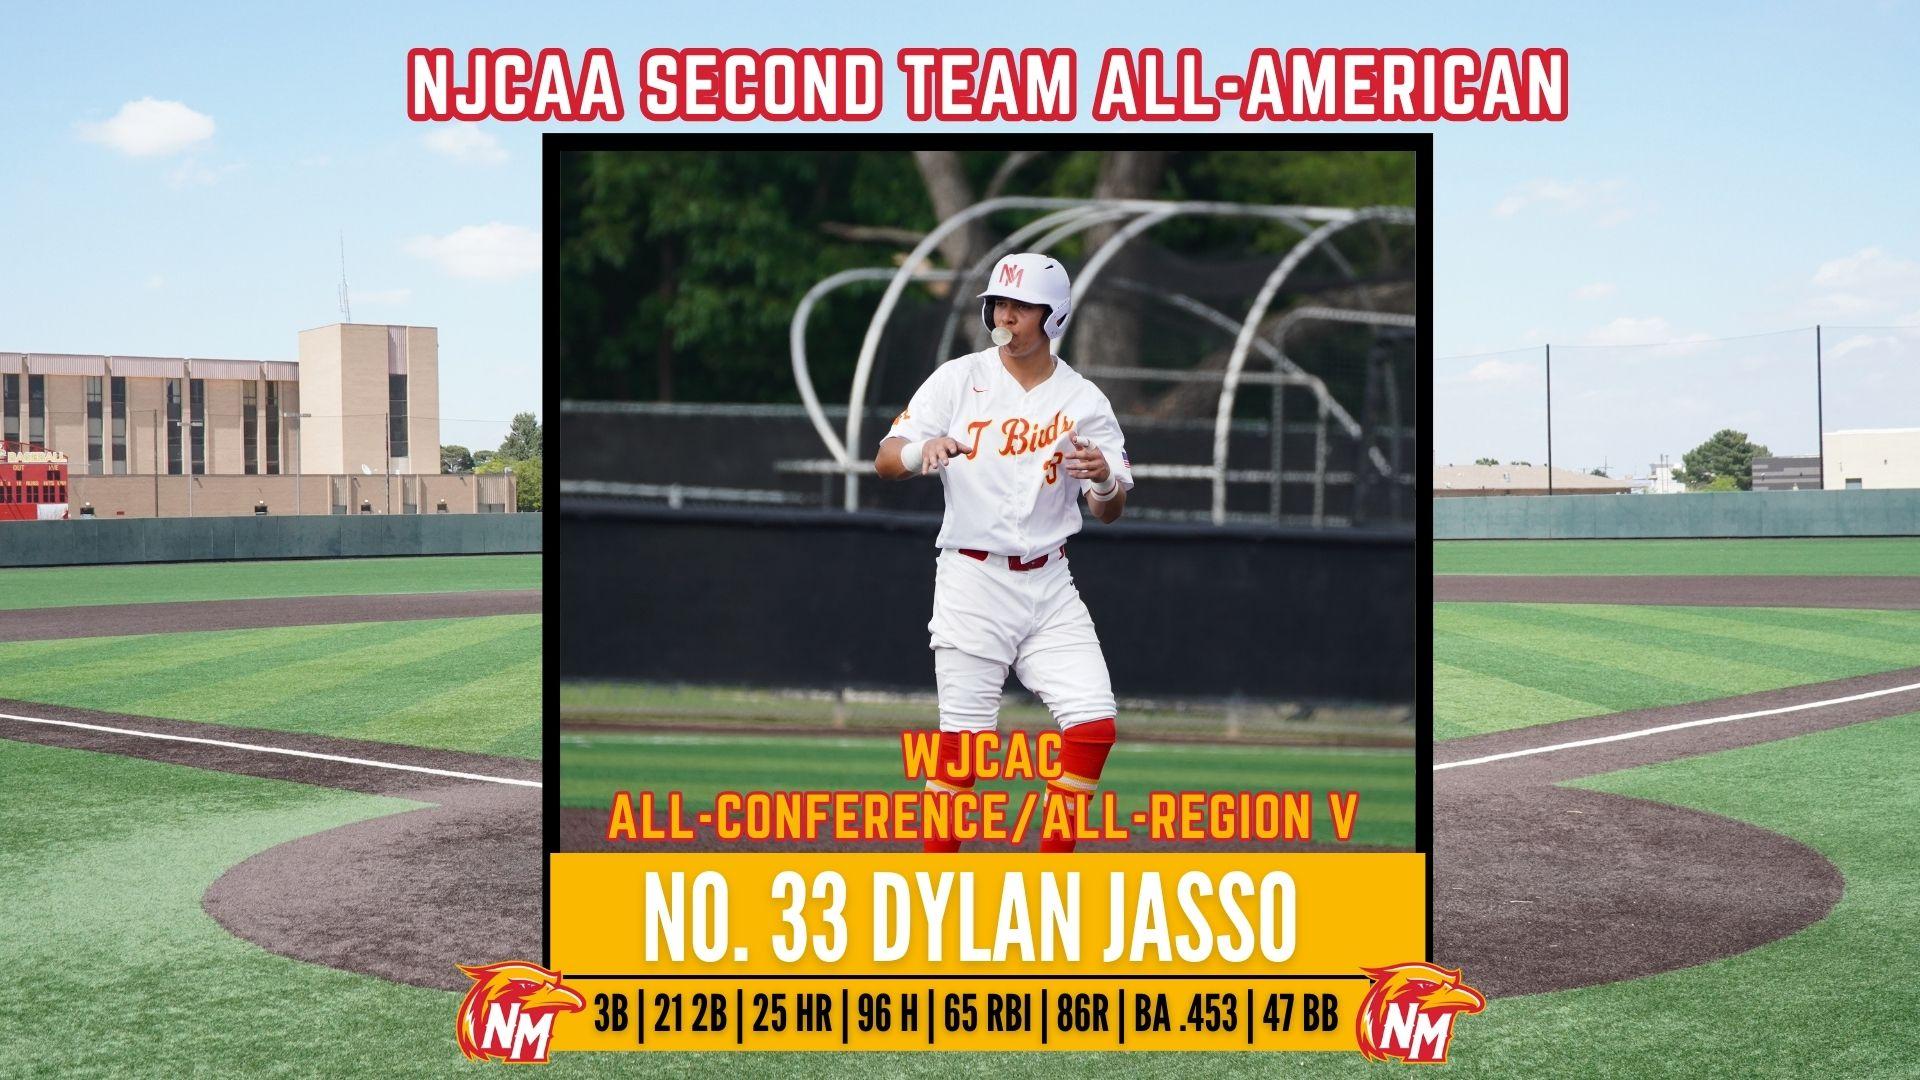 Dylan Jasso Named Second Team All-American, Brent Iredale Voted WJCAC MVP, and HC Michael Robbins Earns Second Straight WJCAC COY Award